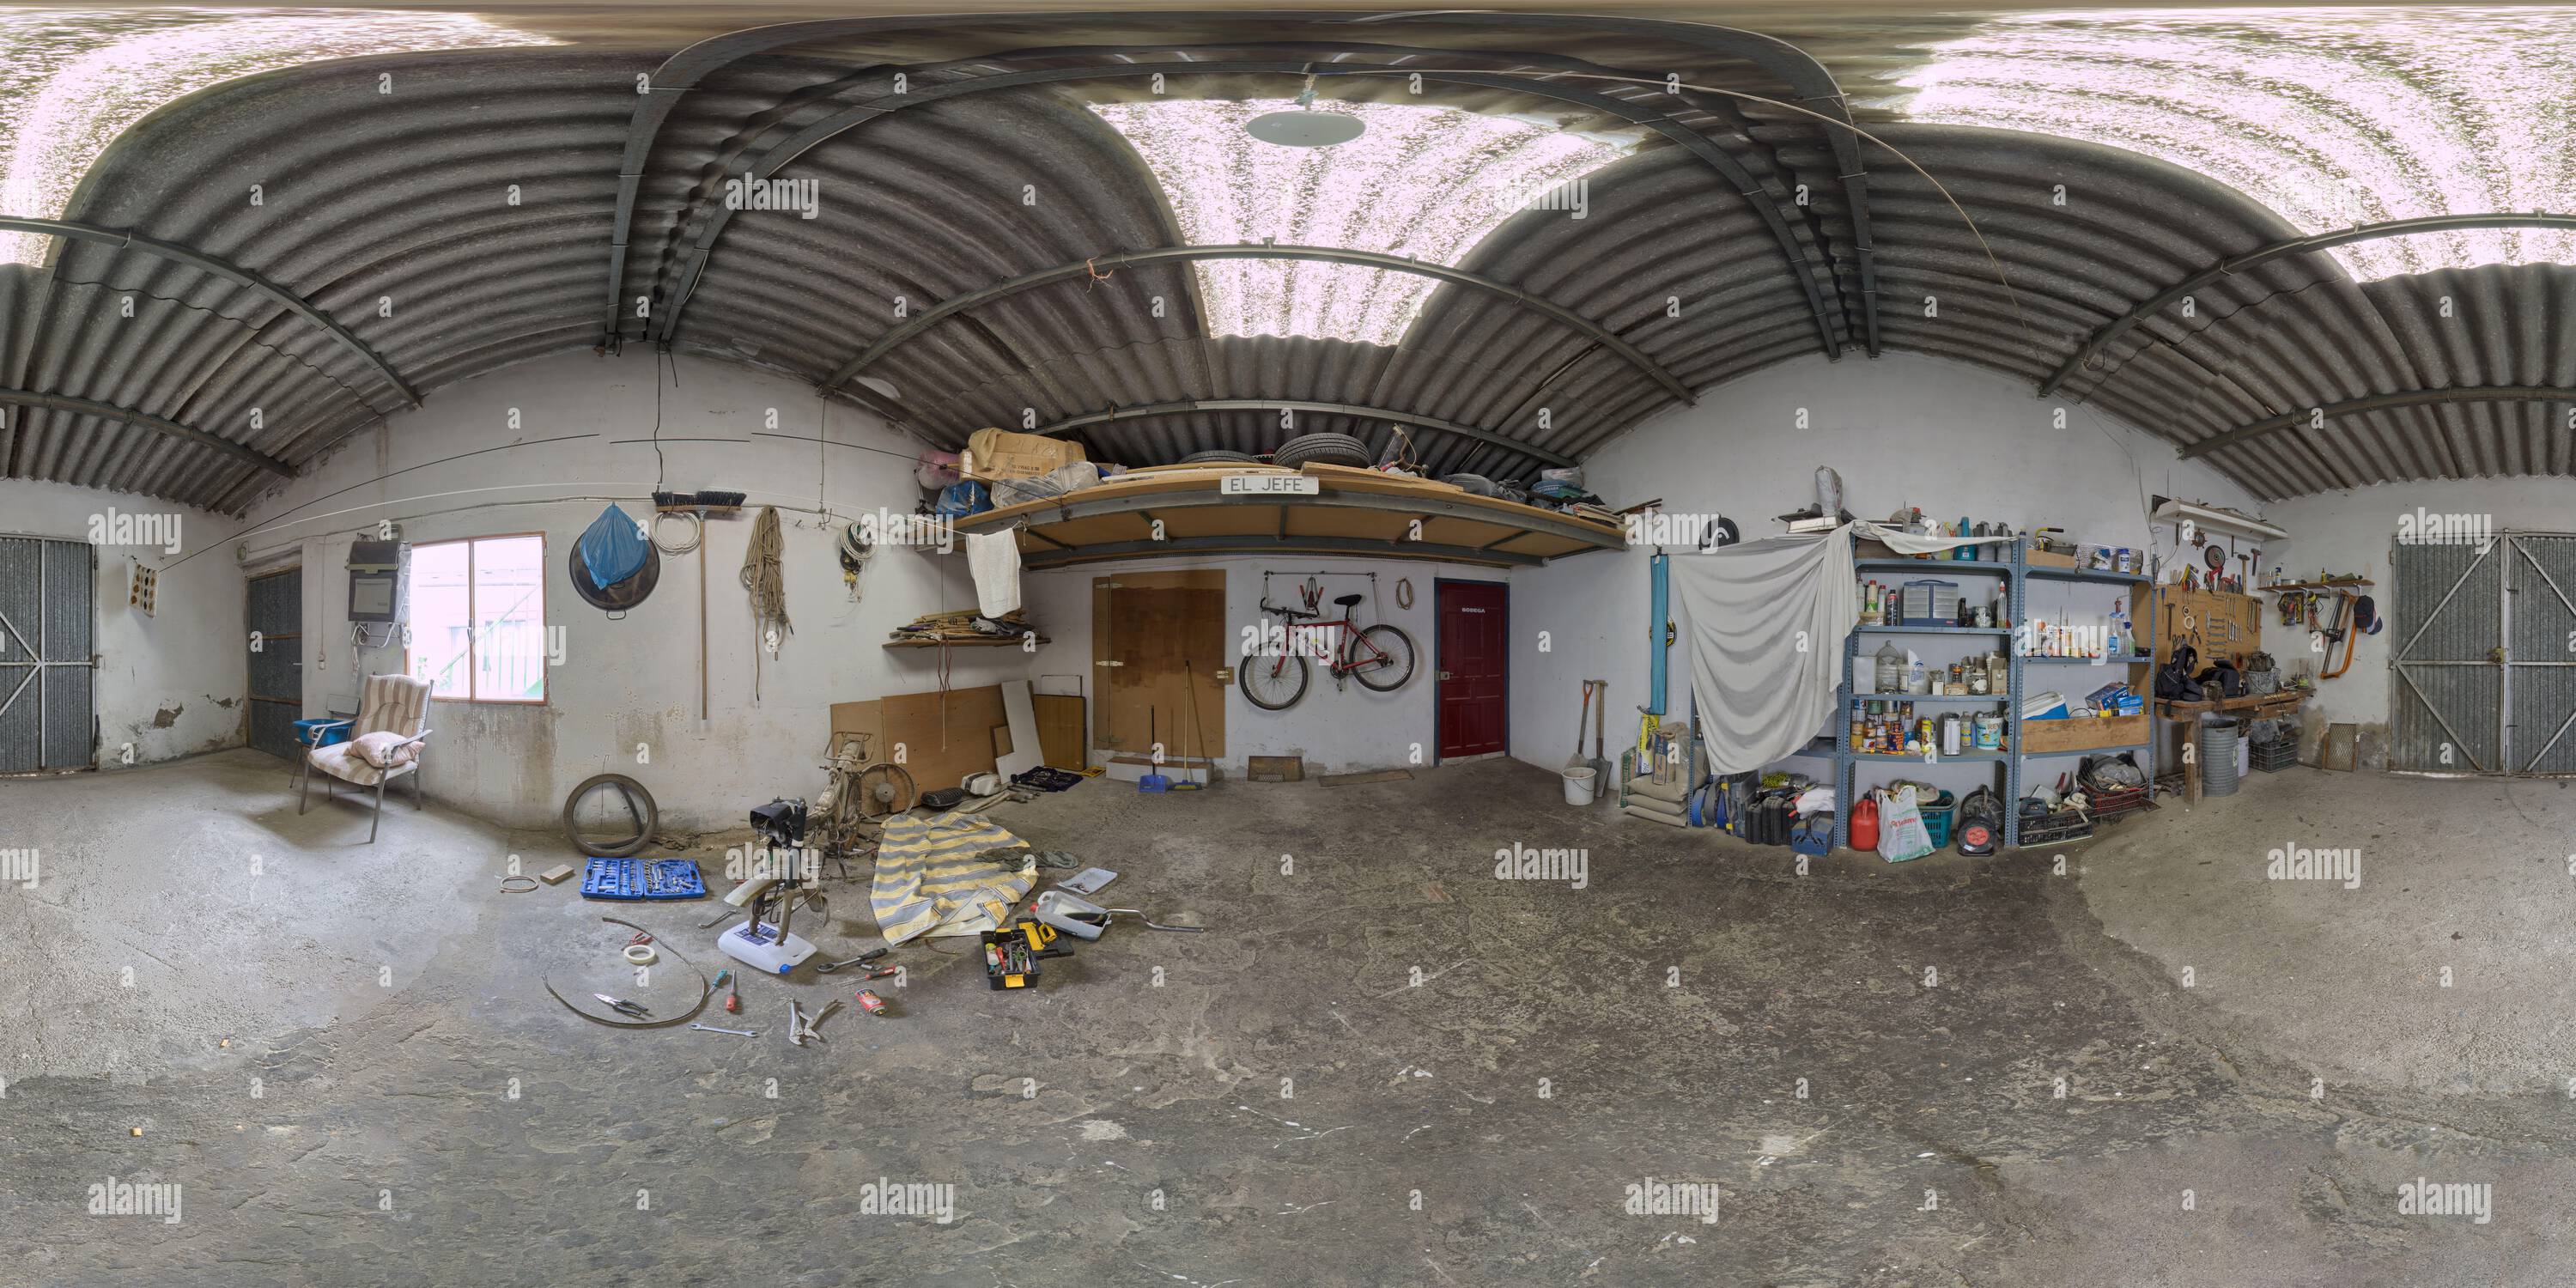 360 degree panoramic view of Panoramic 360 degree photograph of a garage with a motorcycle disassembled to fix it.